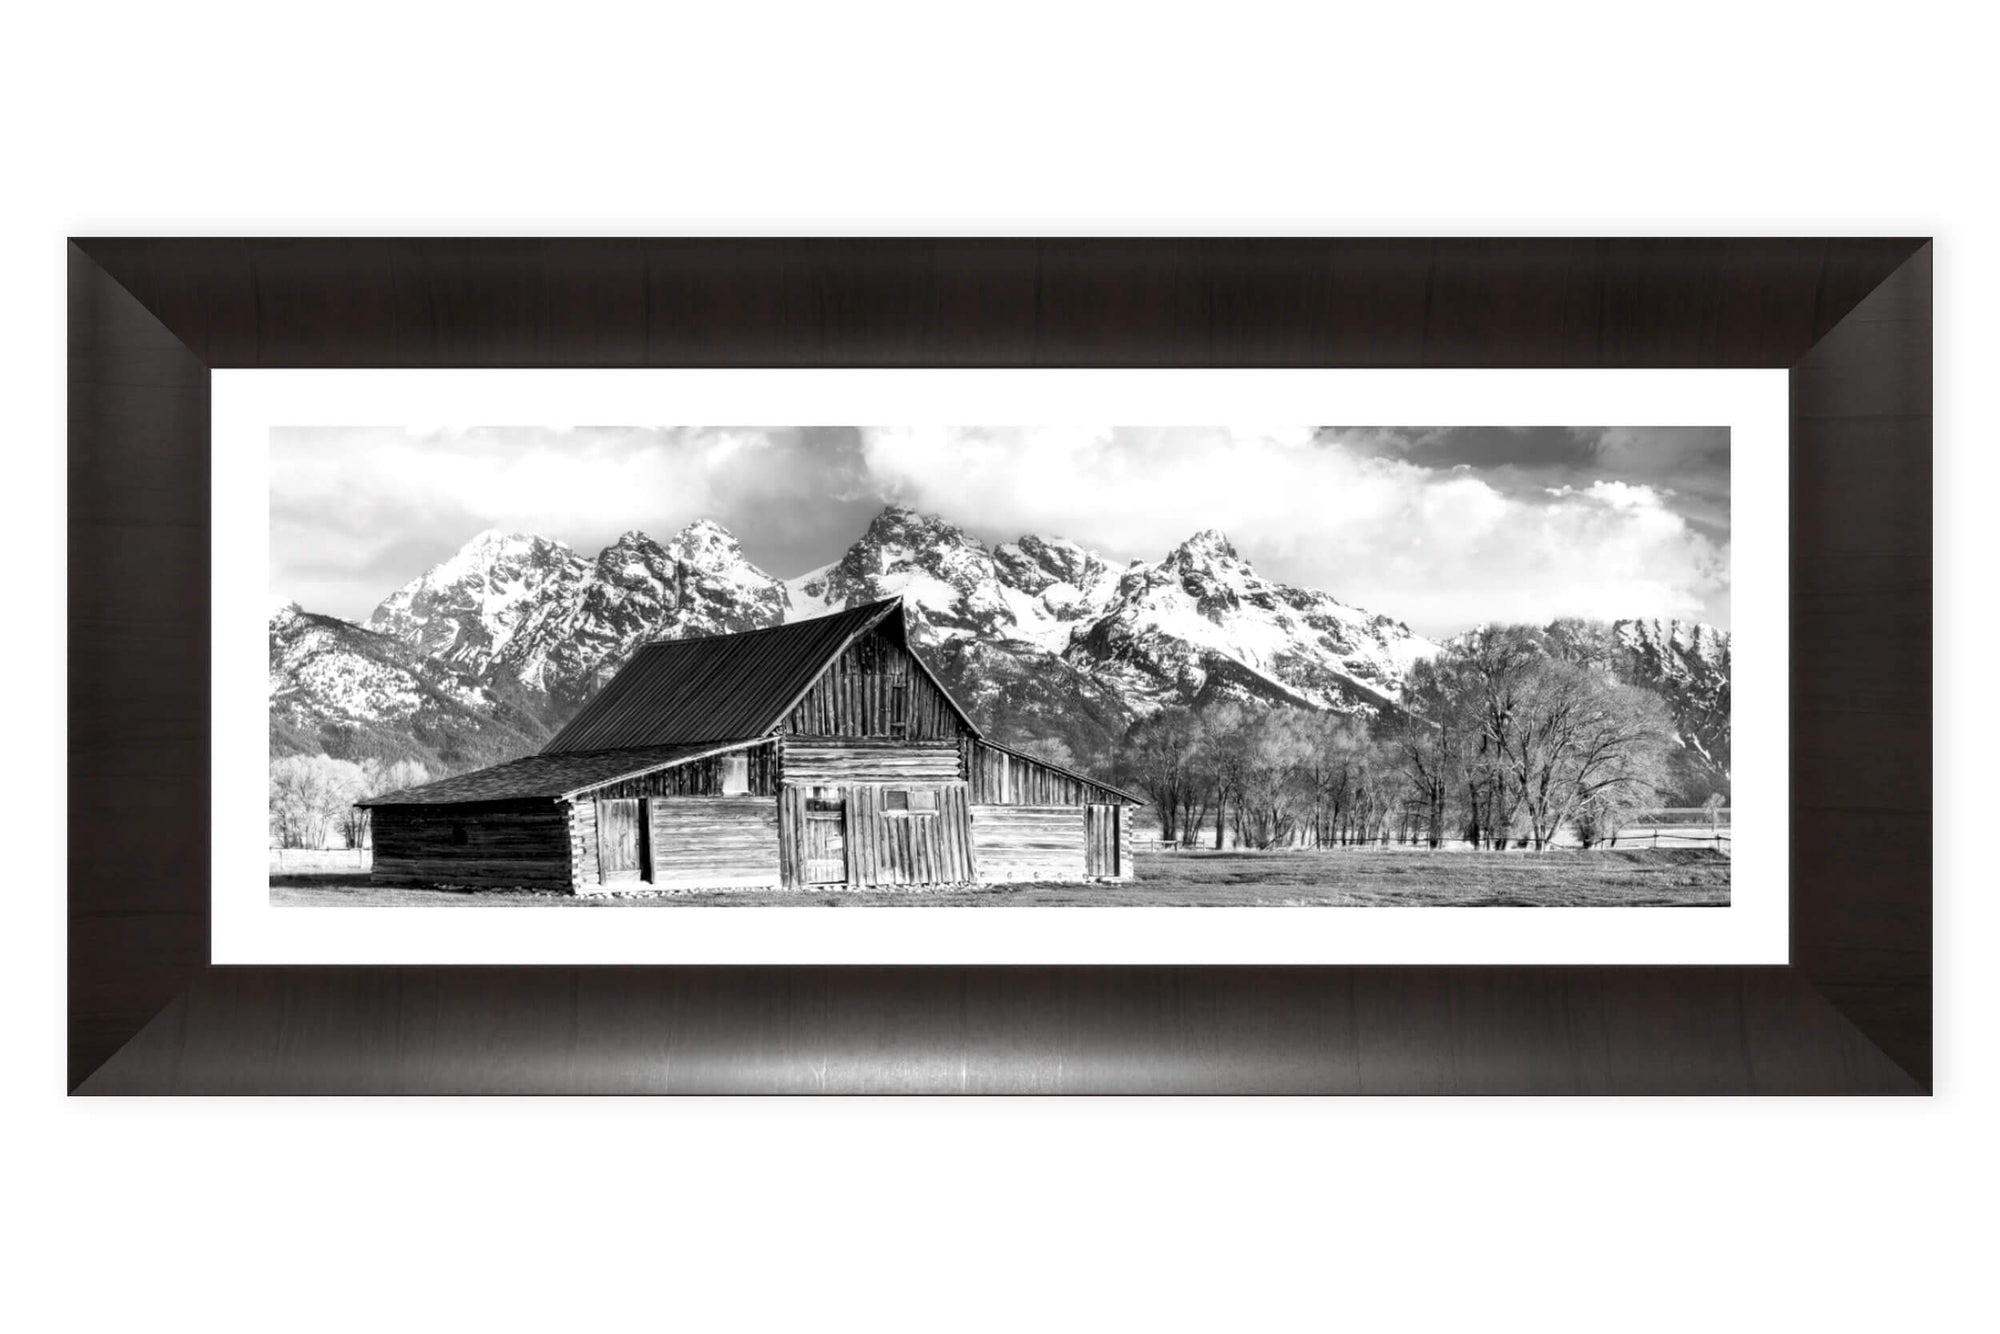 A framed black and white photograph of the famous barn in Grand Teton National Park.